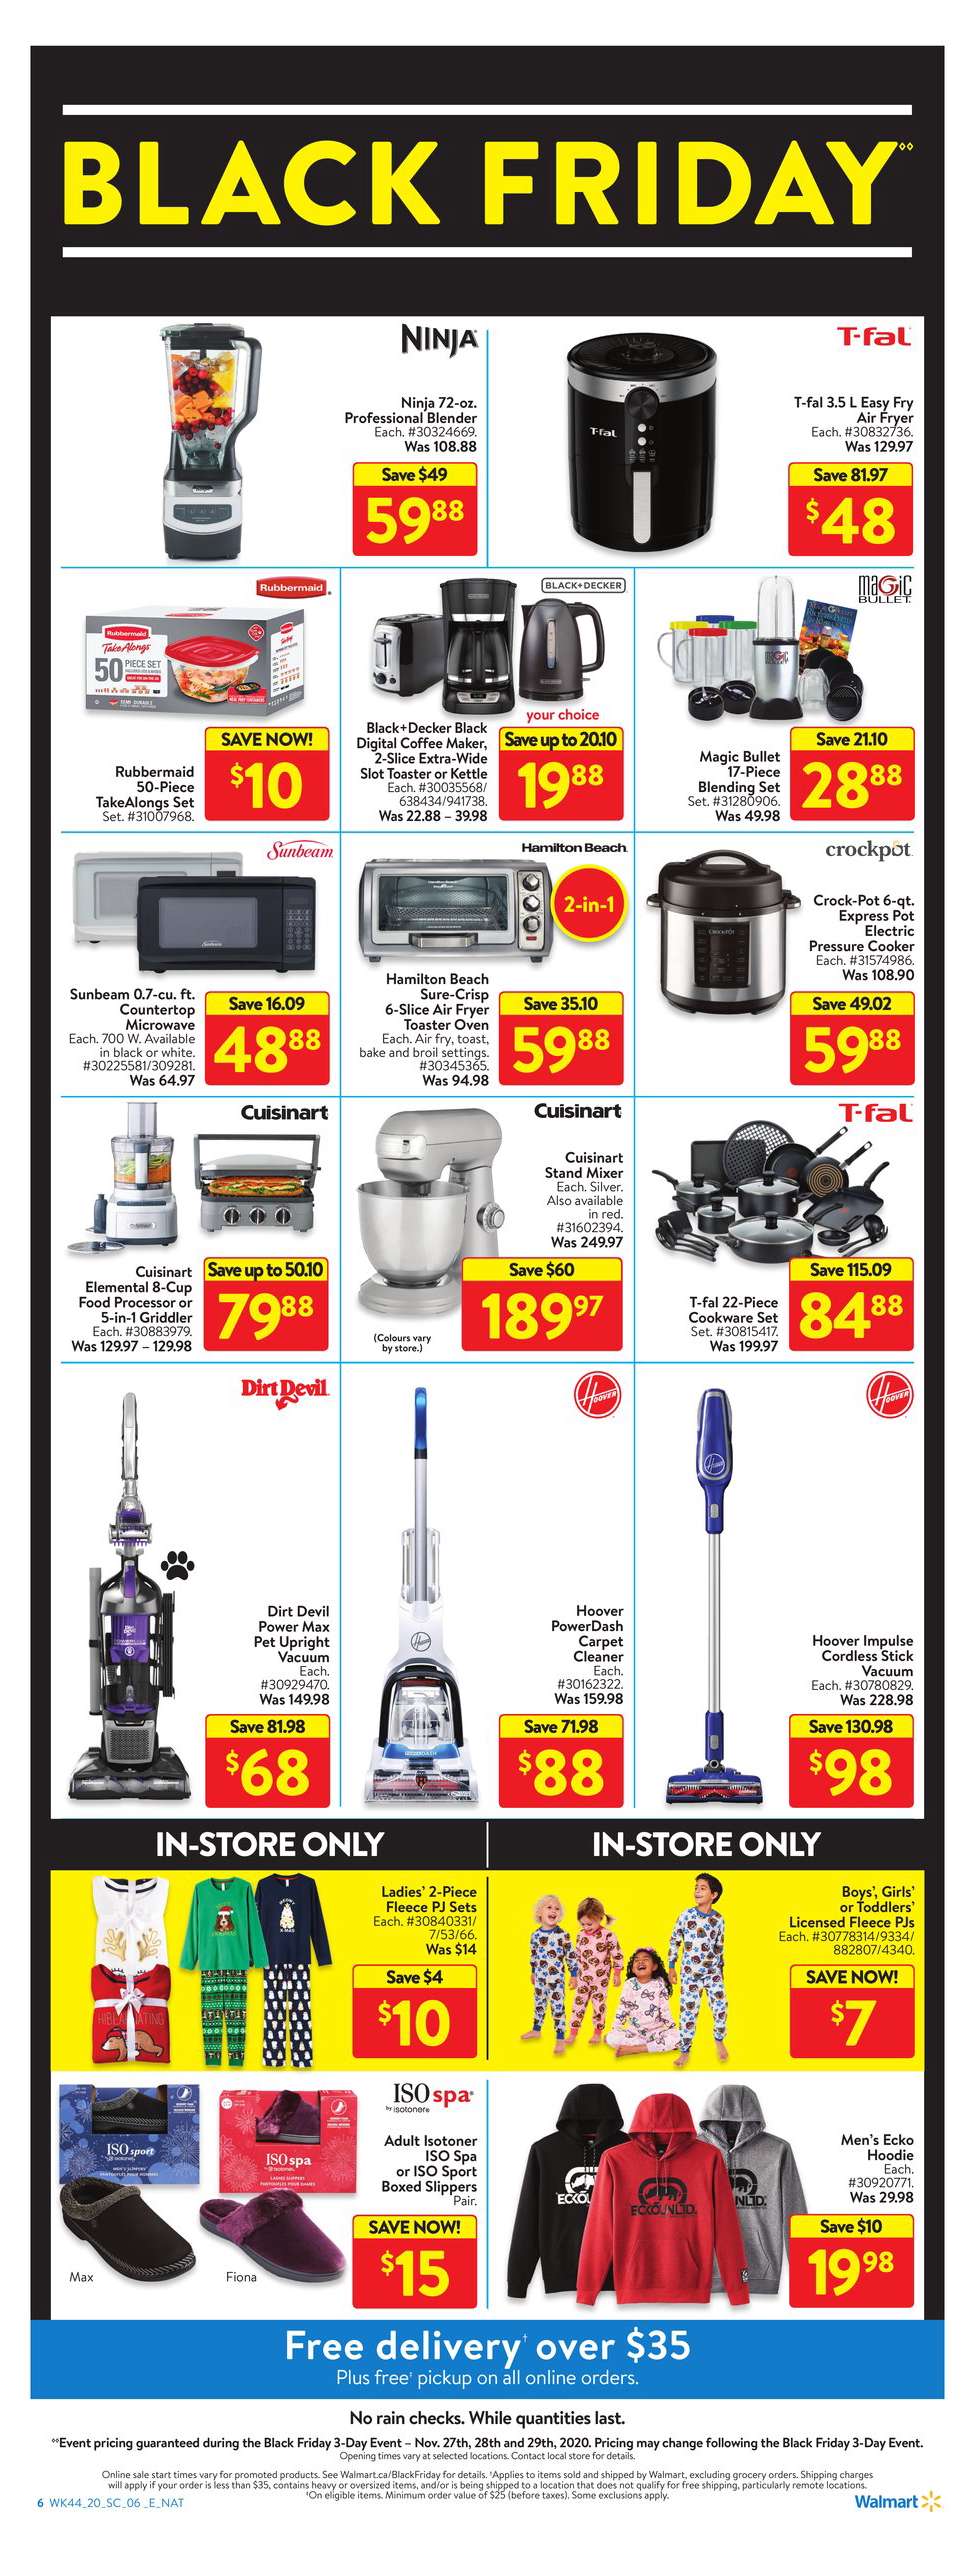 Walmart Black Friday Flyer Deals 2020 Canada - What Are The Real Black Friday Deals